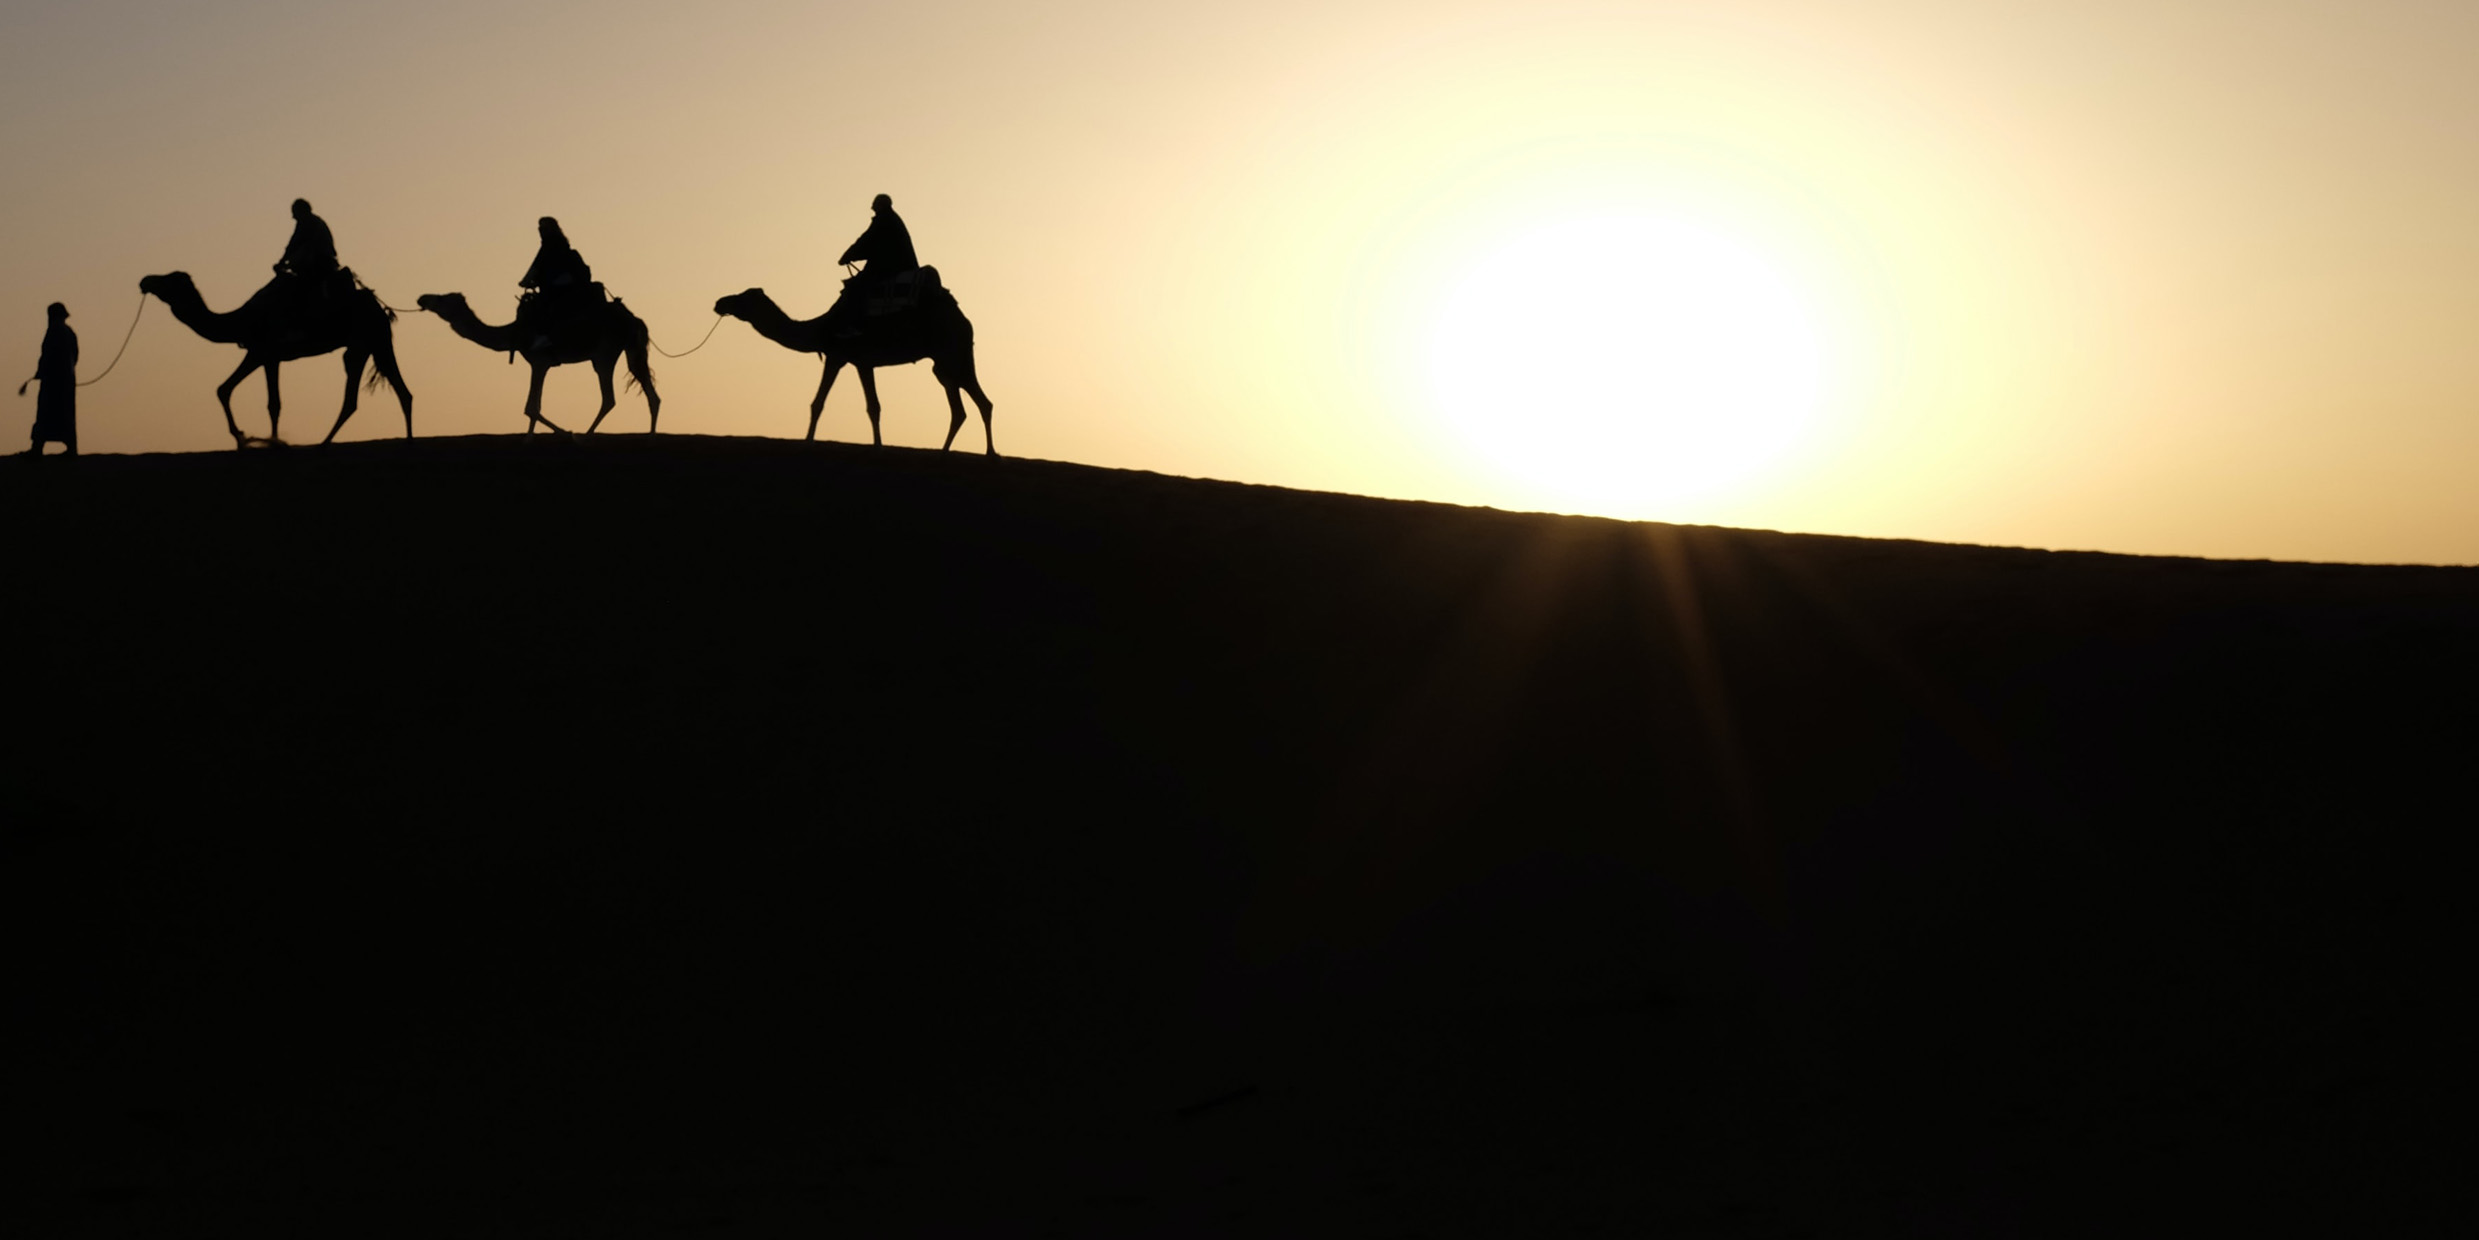 Image of three camels and riders traveling across a desert